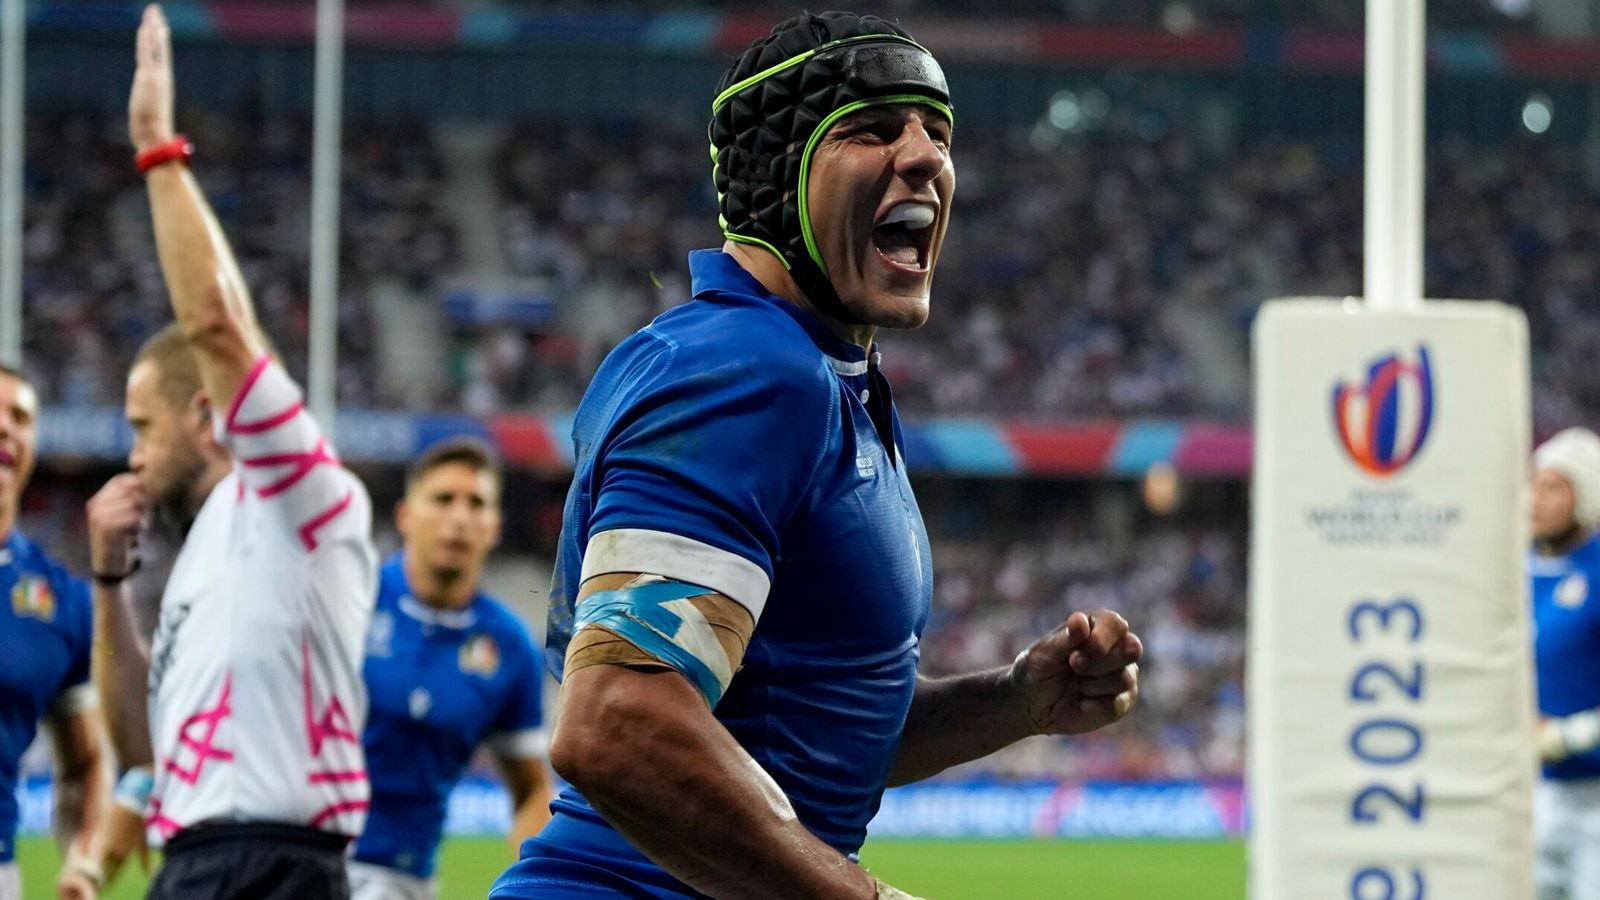 Rugby World Cup Italy survive Uruguay scare with 38-17 victory as Azzurri produce second-half comeback to lead Pool A Rugby Union News Sky Sports